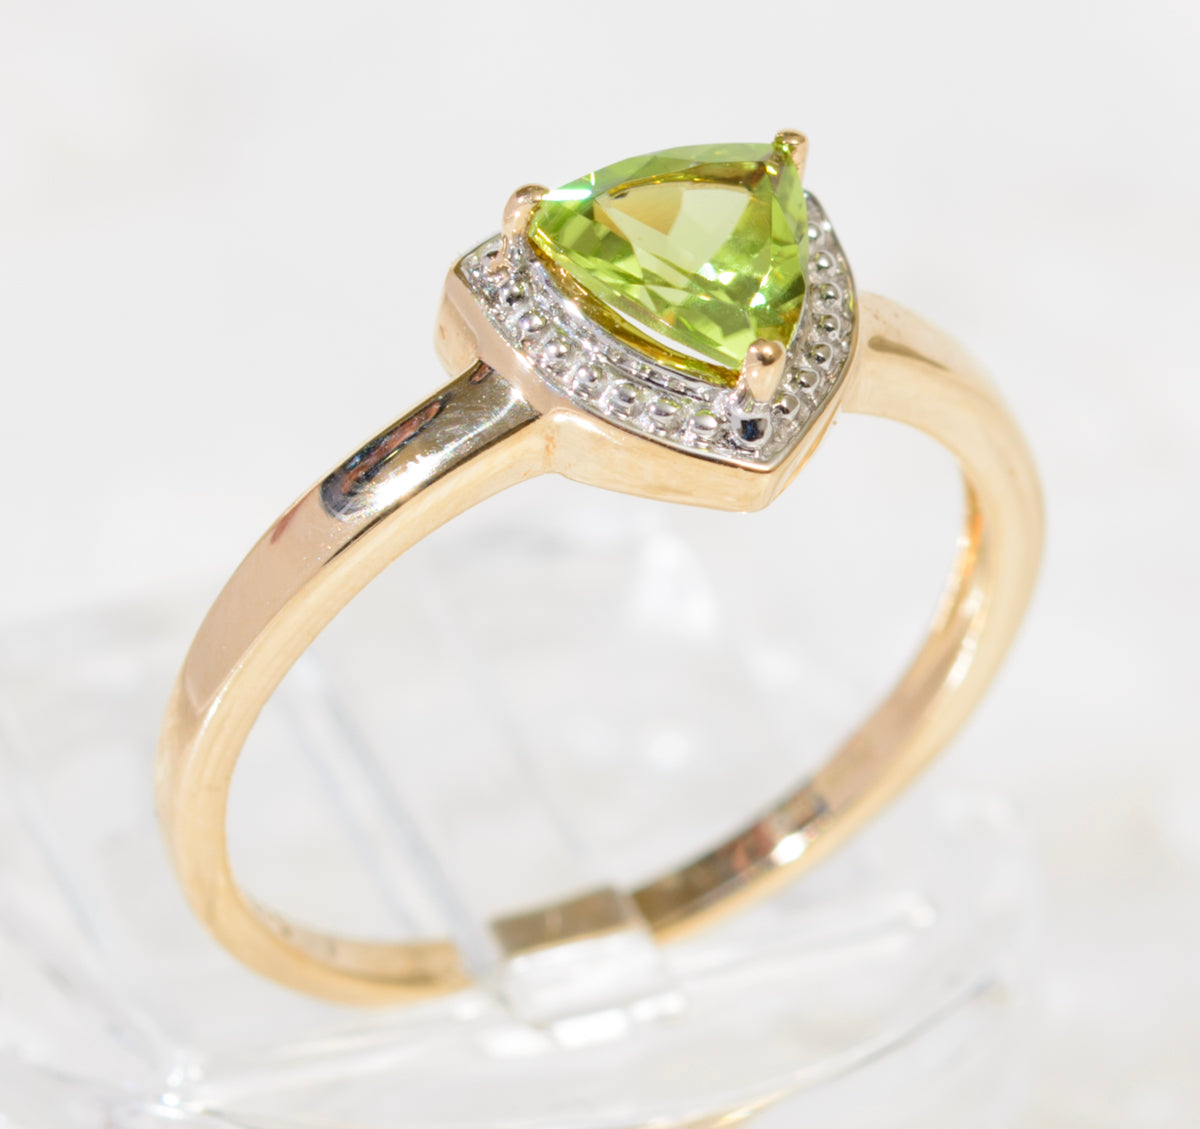 Lovely 9ct Gold & Trilliant Cut Peridot Gemstone Ring Ladies Size P (A1914)